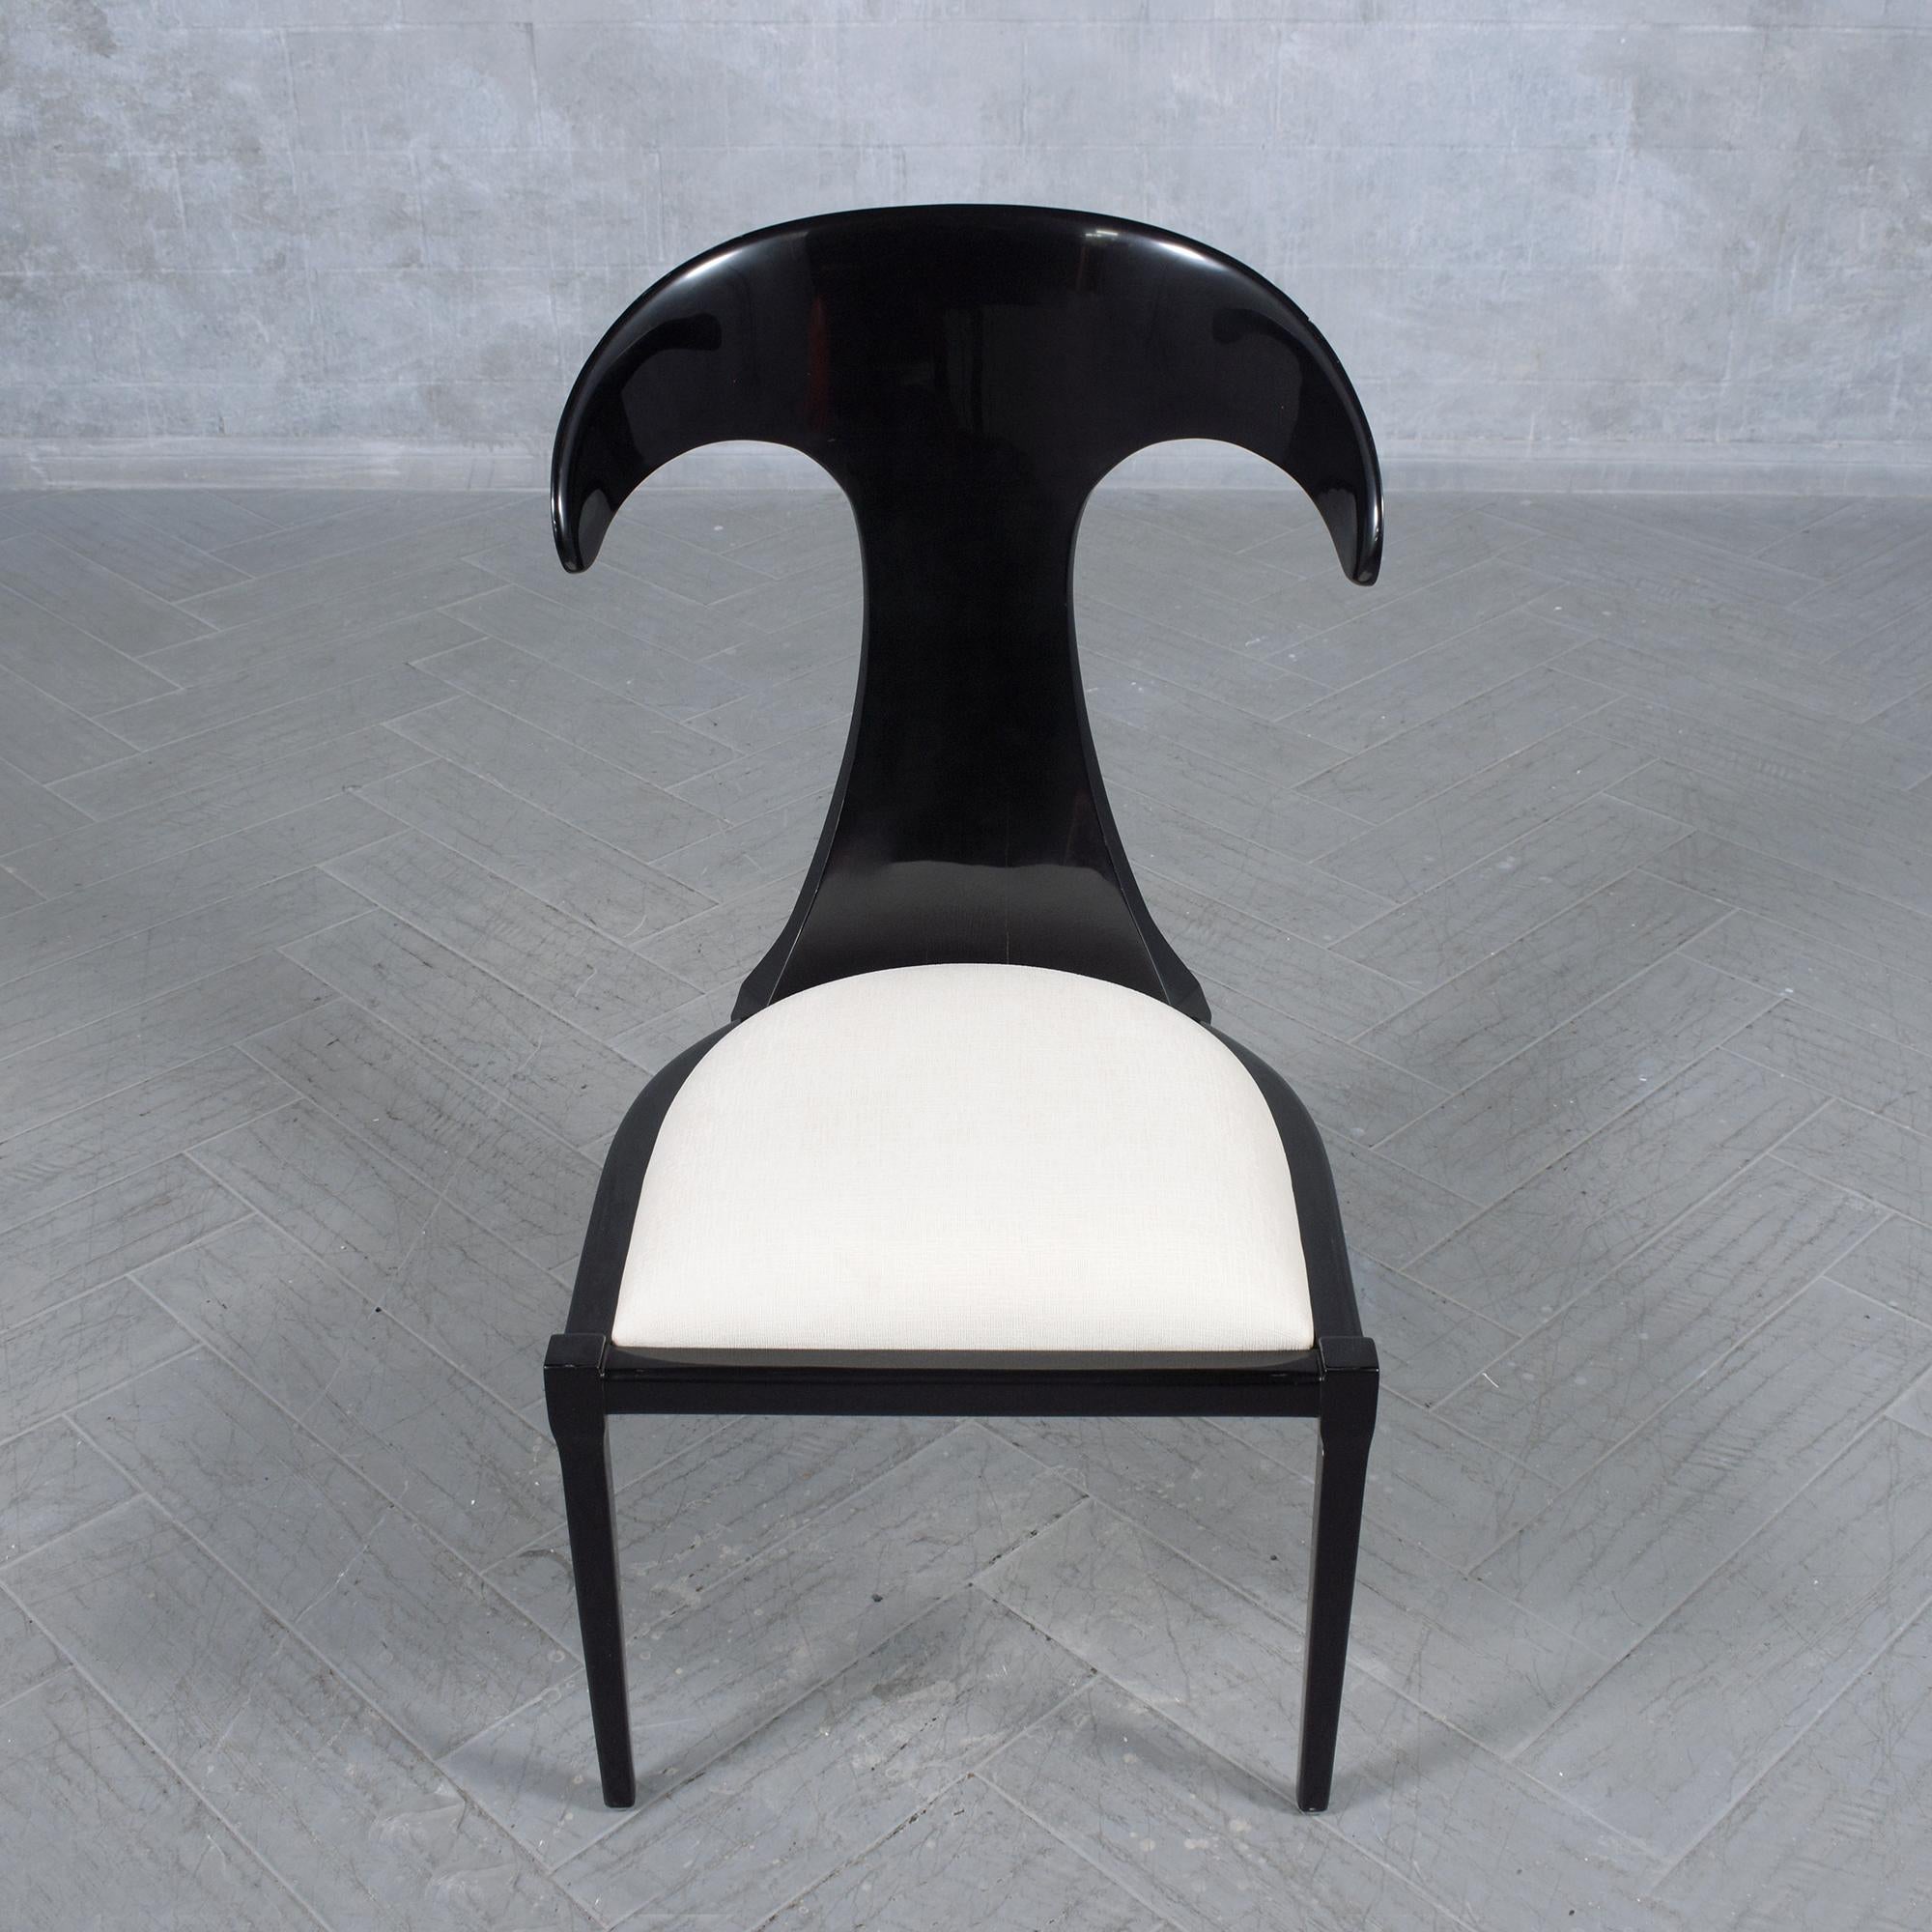 American Ebonized Modernism Side Chair: Refinished Bent Wood with High Backrest Design For Sale